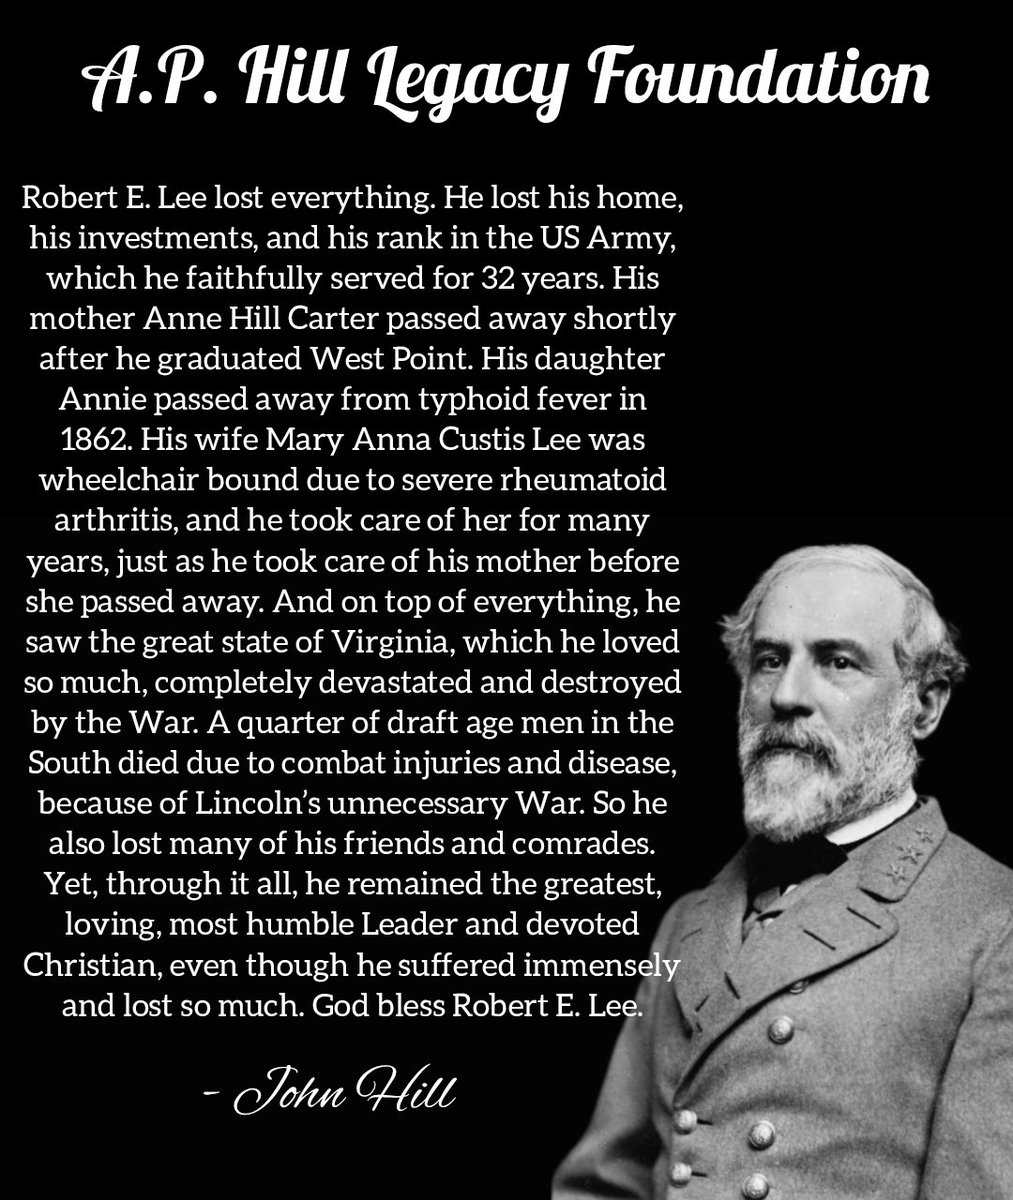 Robert E. Lee lost everything. He lost his home, his investments, and his rank in the US Army, which he faithfully served for 32 years. His mother Anne Hill Carter passed away shortly after he graduated West Point. His daughter Annie passed away from typhoid fever in 1862. His